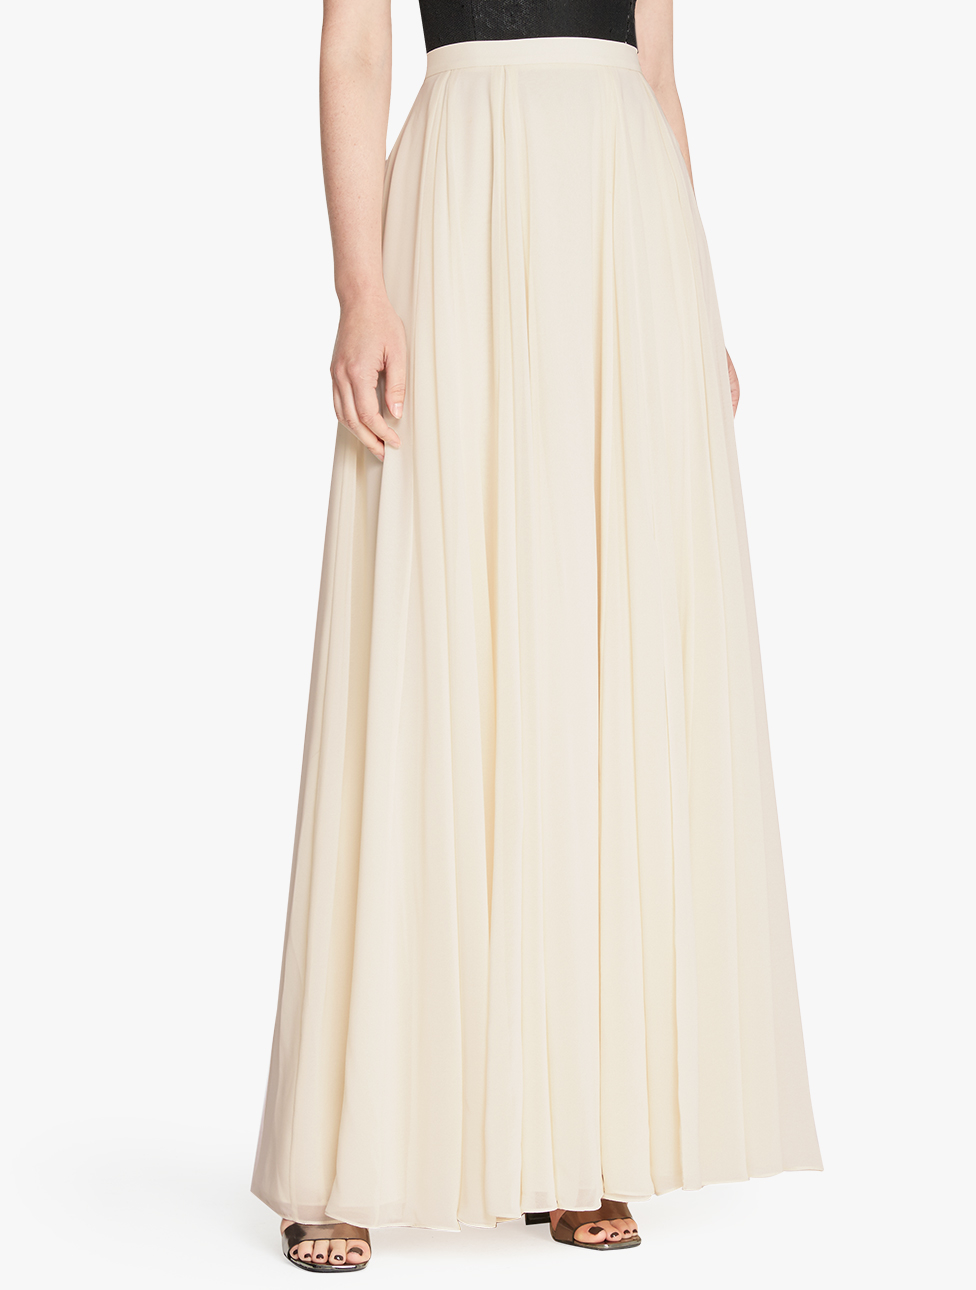 Lyst - Halston Flowy Maxi Skirt in Natural